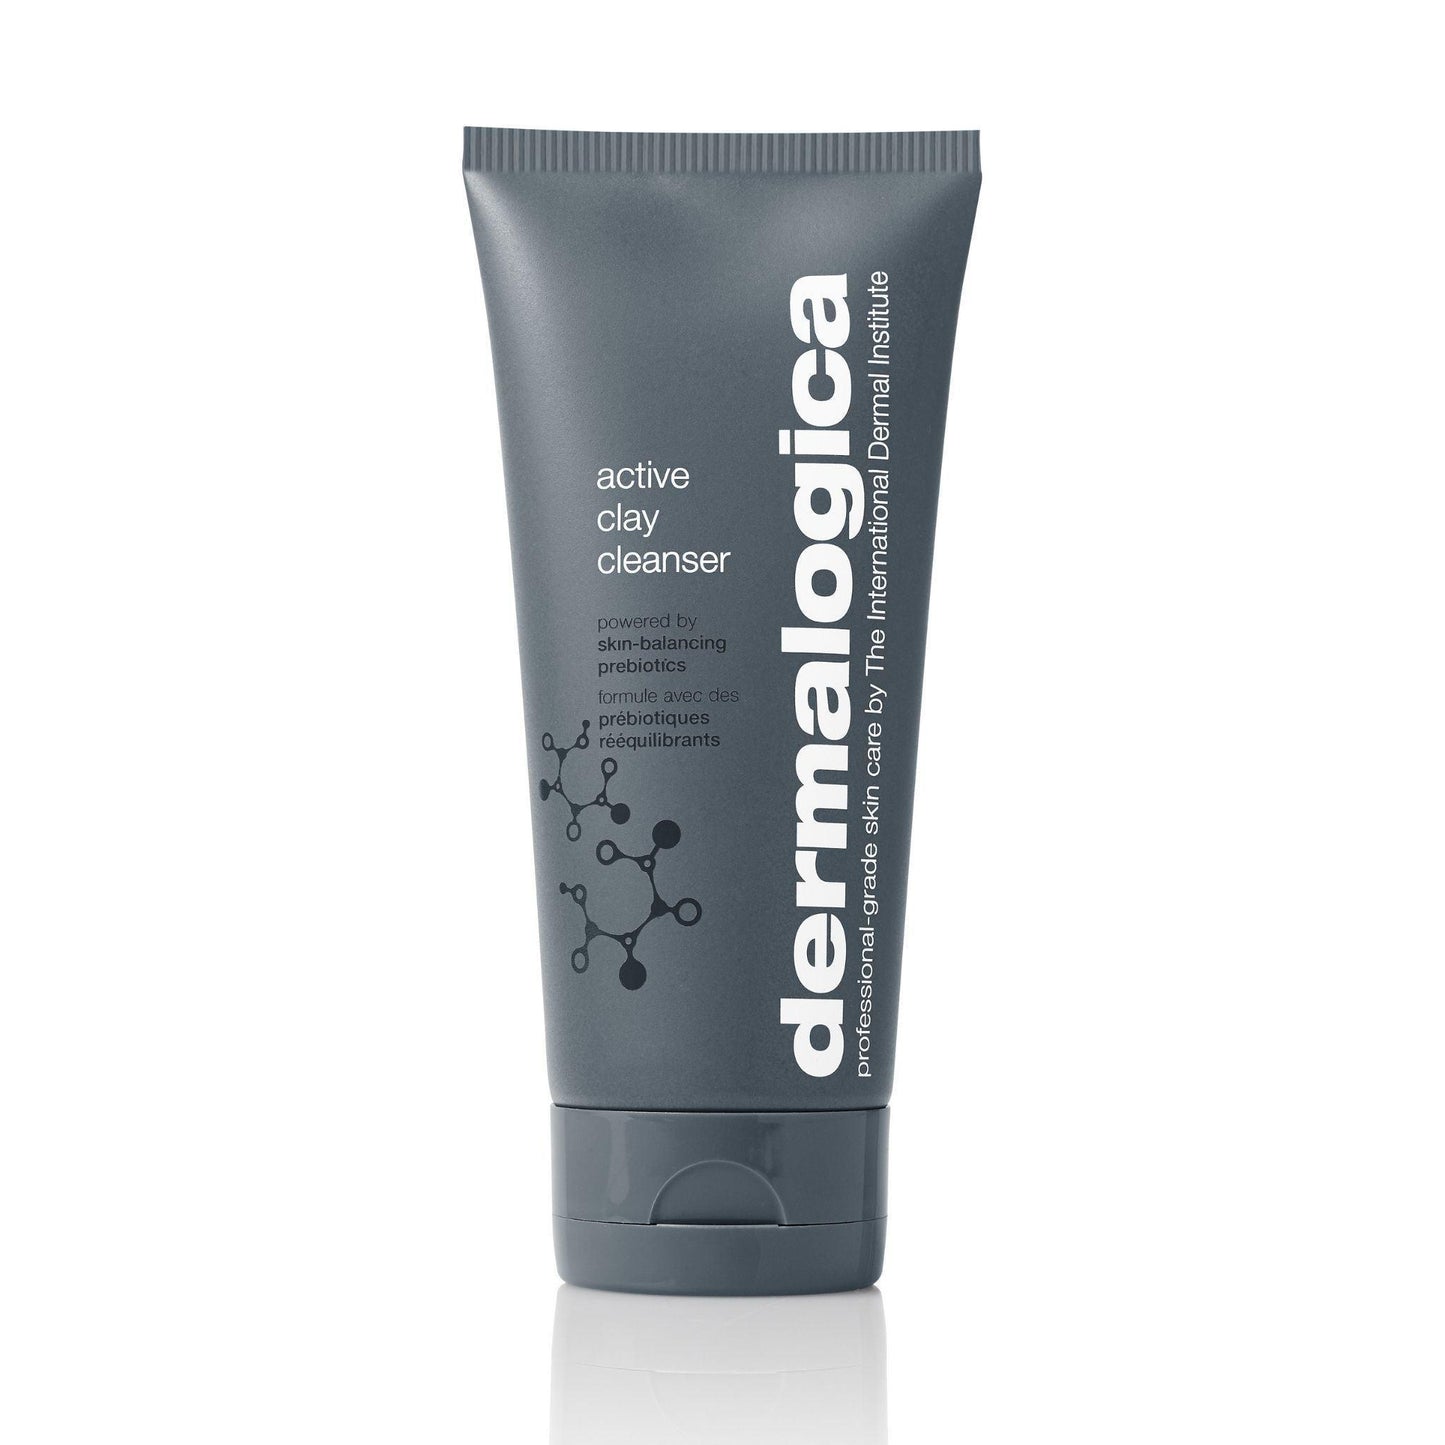 active clay cleanser - Dermalogica Singapore